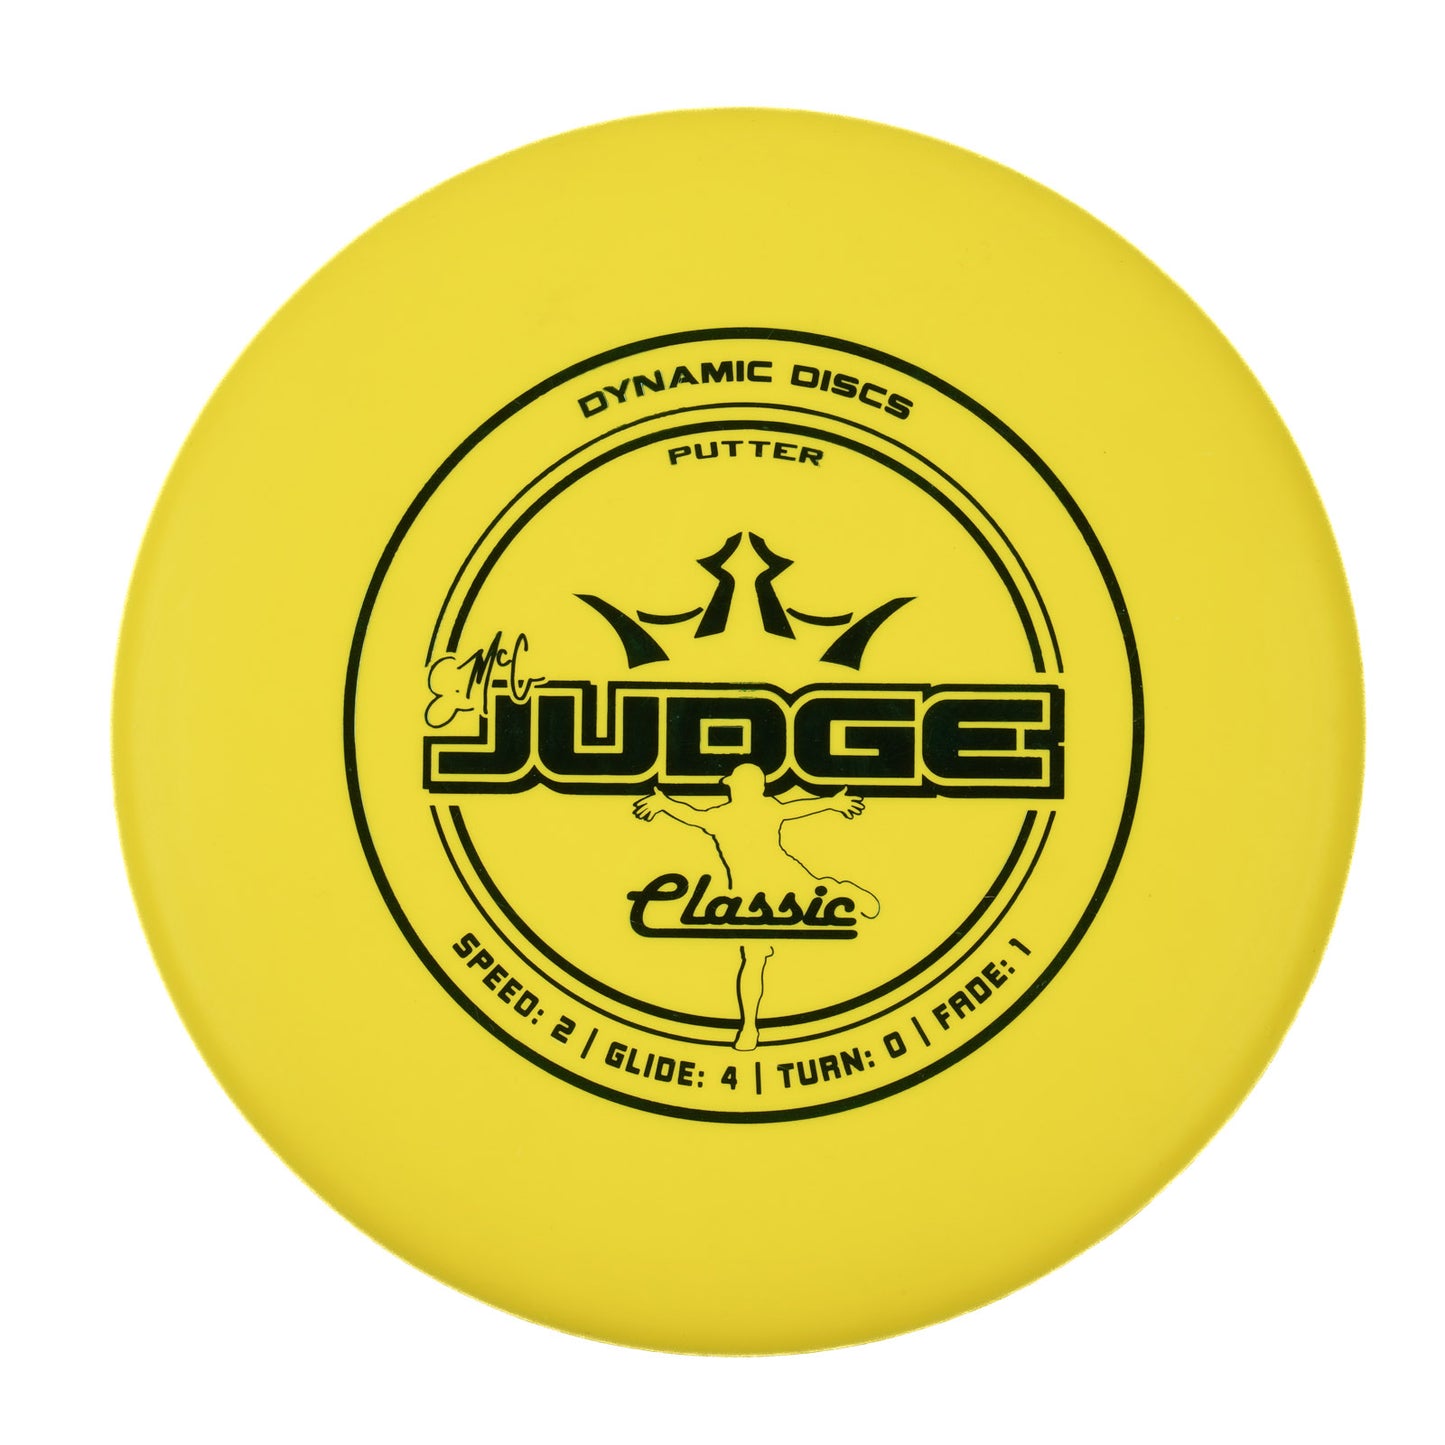 Dynamic Discs EMAC Judge - Classic 173g | Style 0001